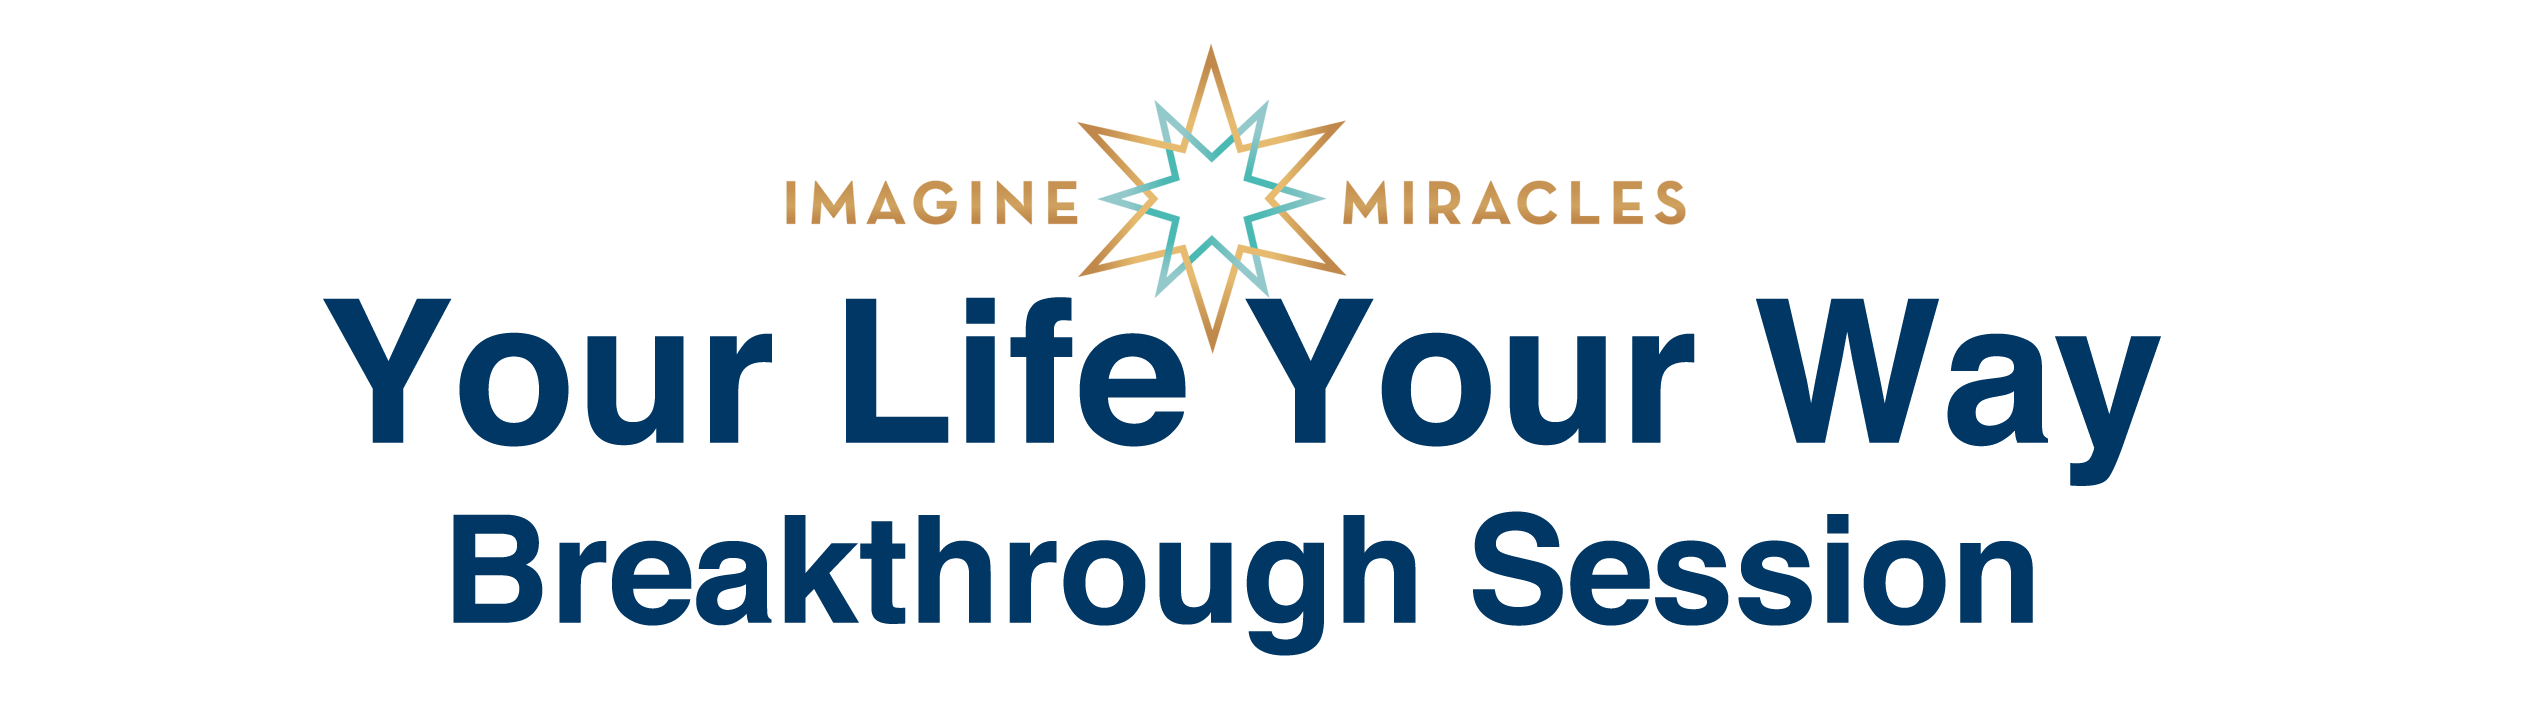 qfs-application-imagine-miracles